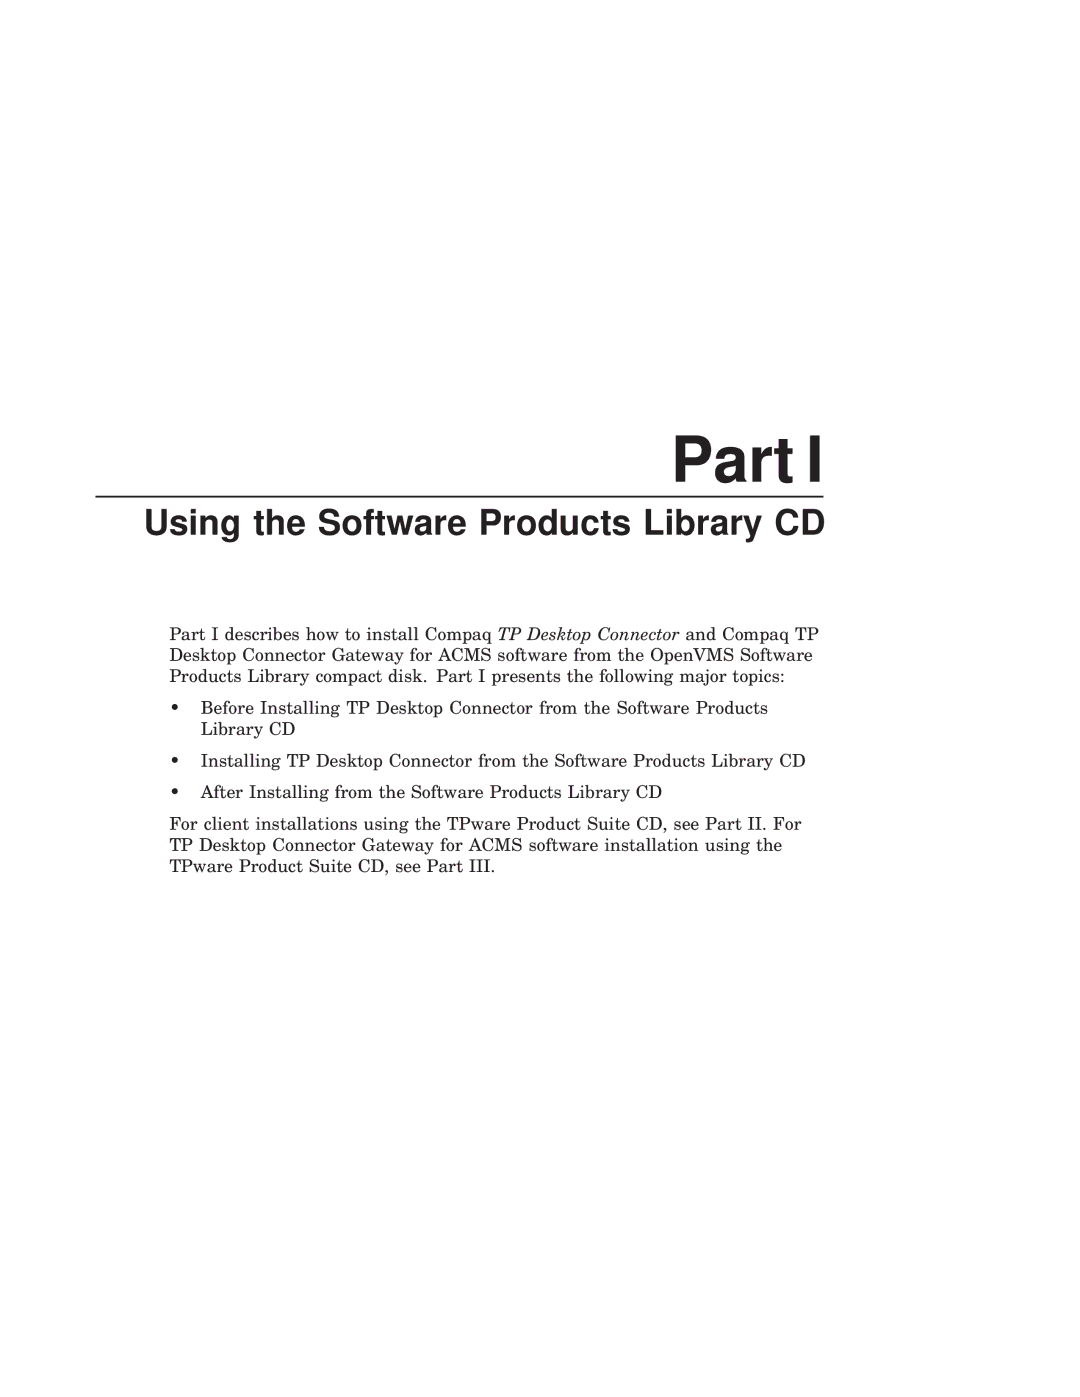 Compaq AAPG9DKTE manual Part, Using the Software Products Library CD 